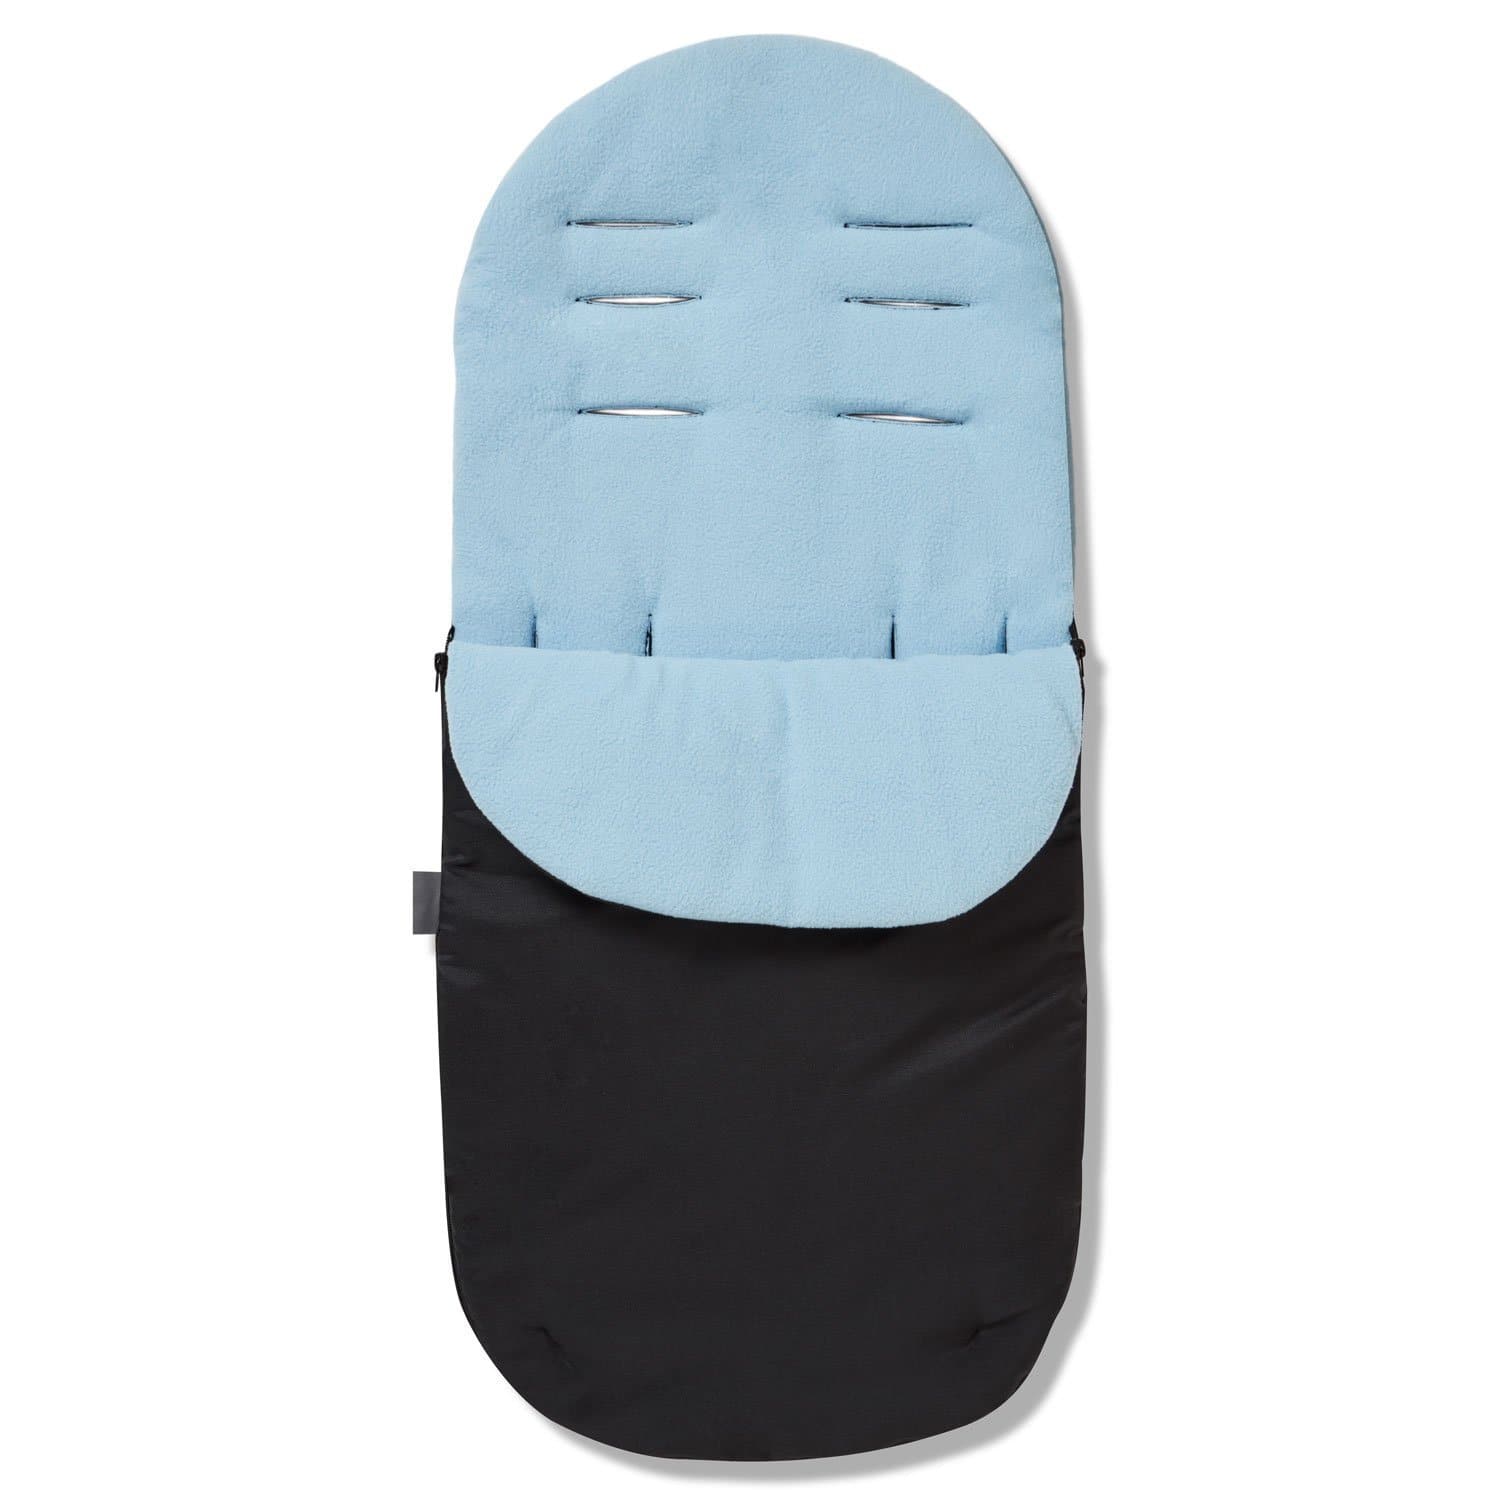 Footmuff / Cosy Toes Compatible with Jane - Light Blue / Fits All Models | For Your Little One